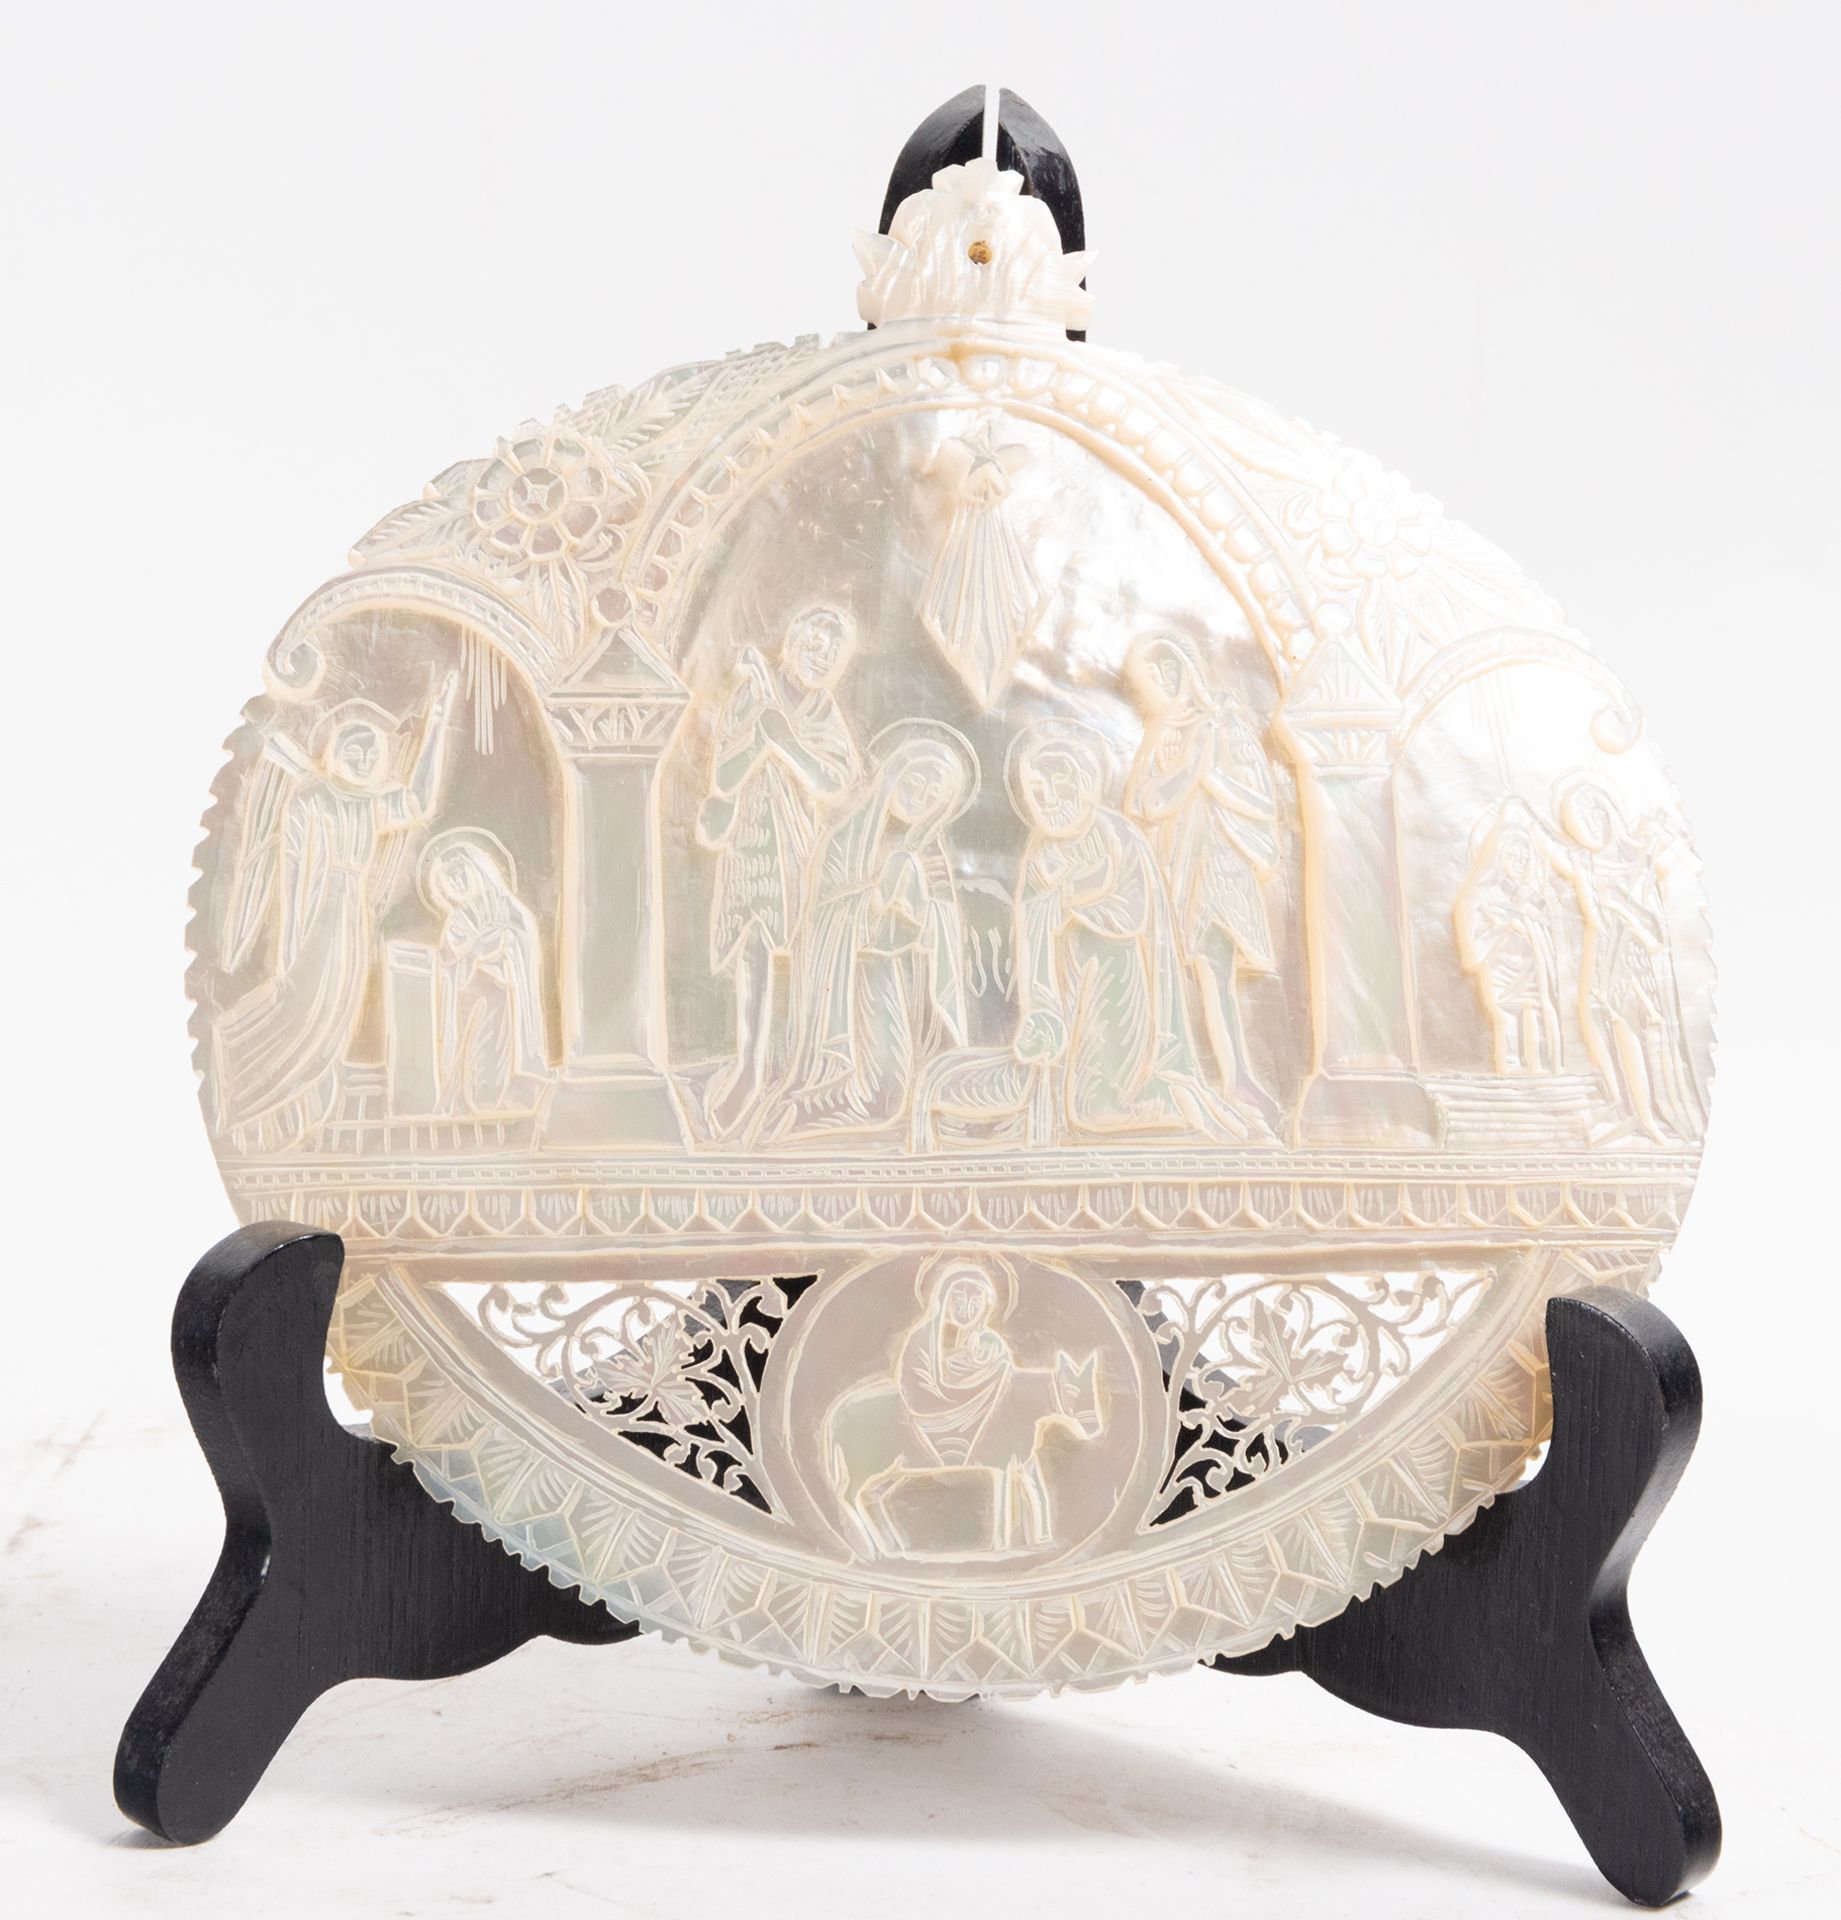 Philippine Shell in Carved Mother of Pearl representing the Birth of Christ, 19th century Philippine